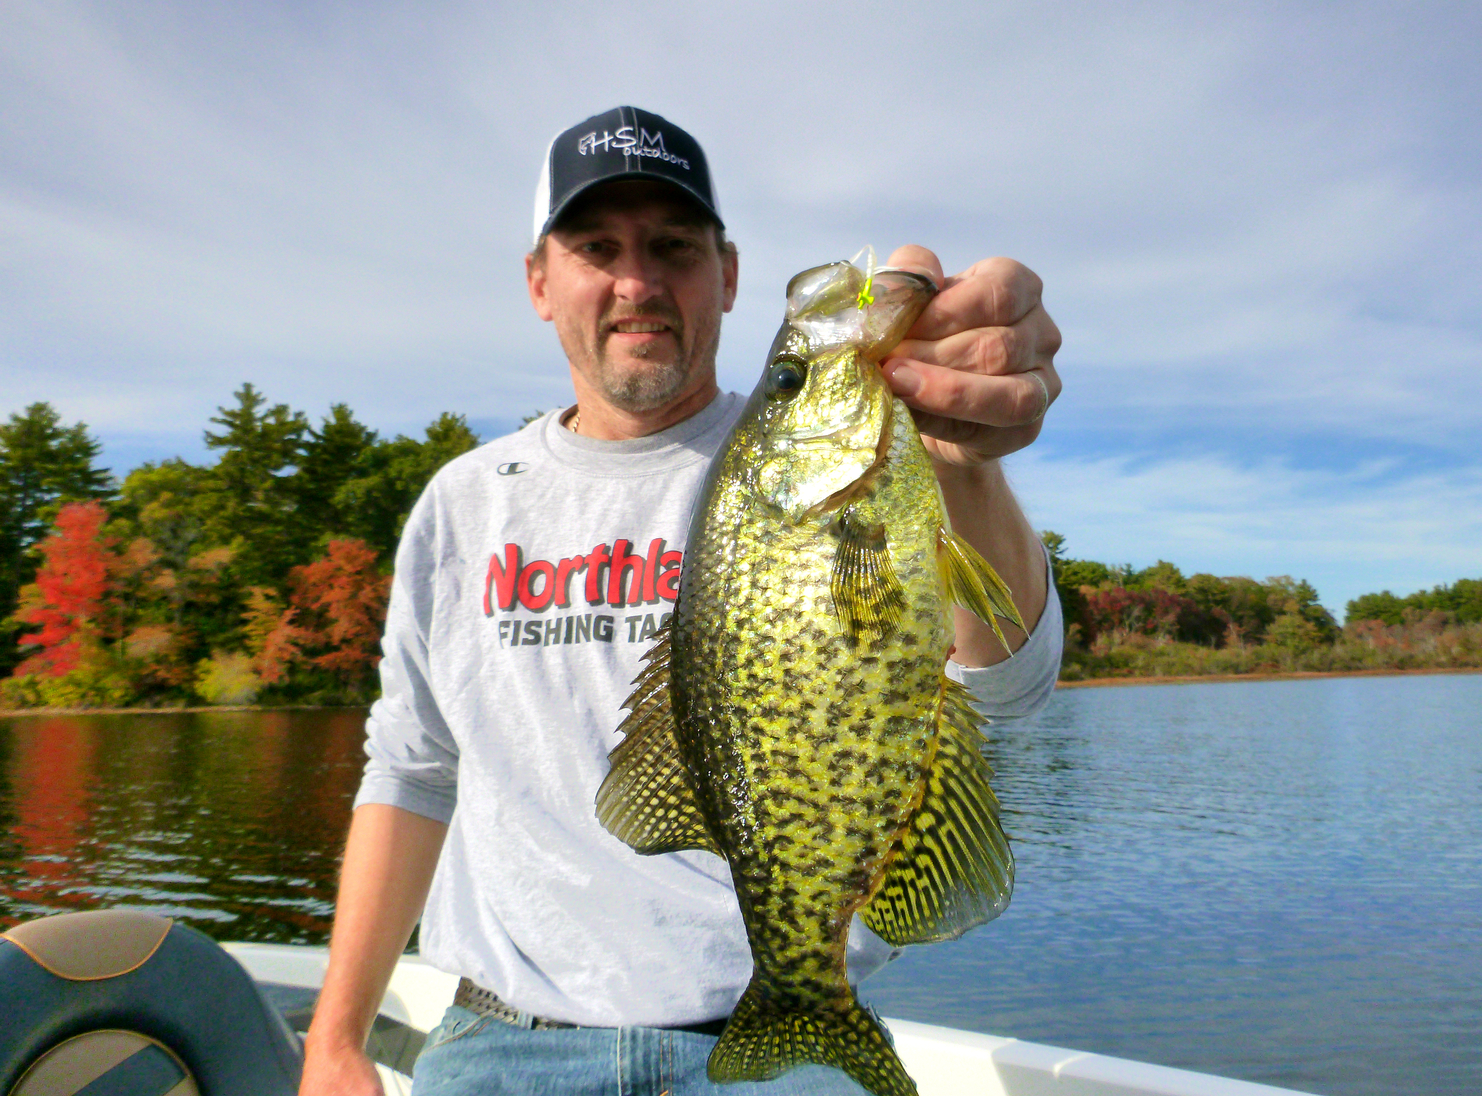 Fisherman holding up a fall time crappie he caught fishing.